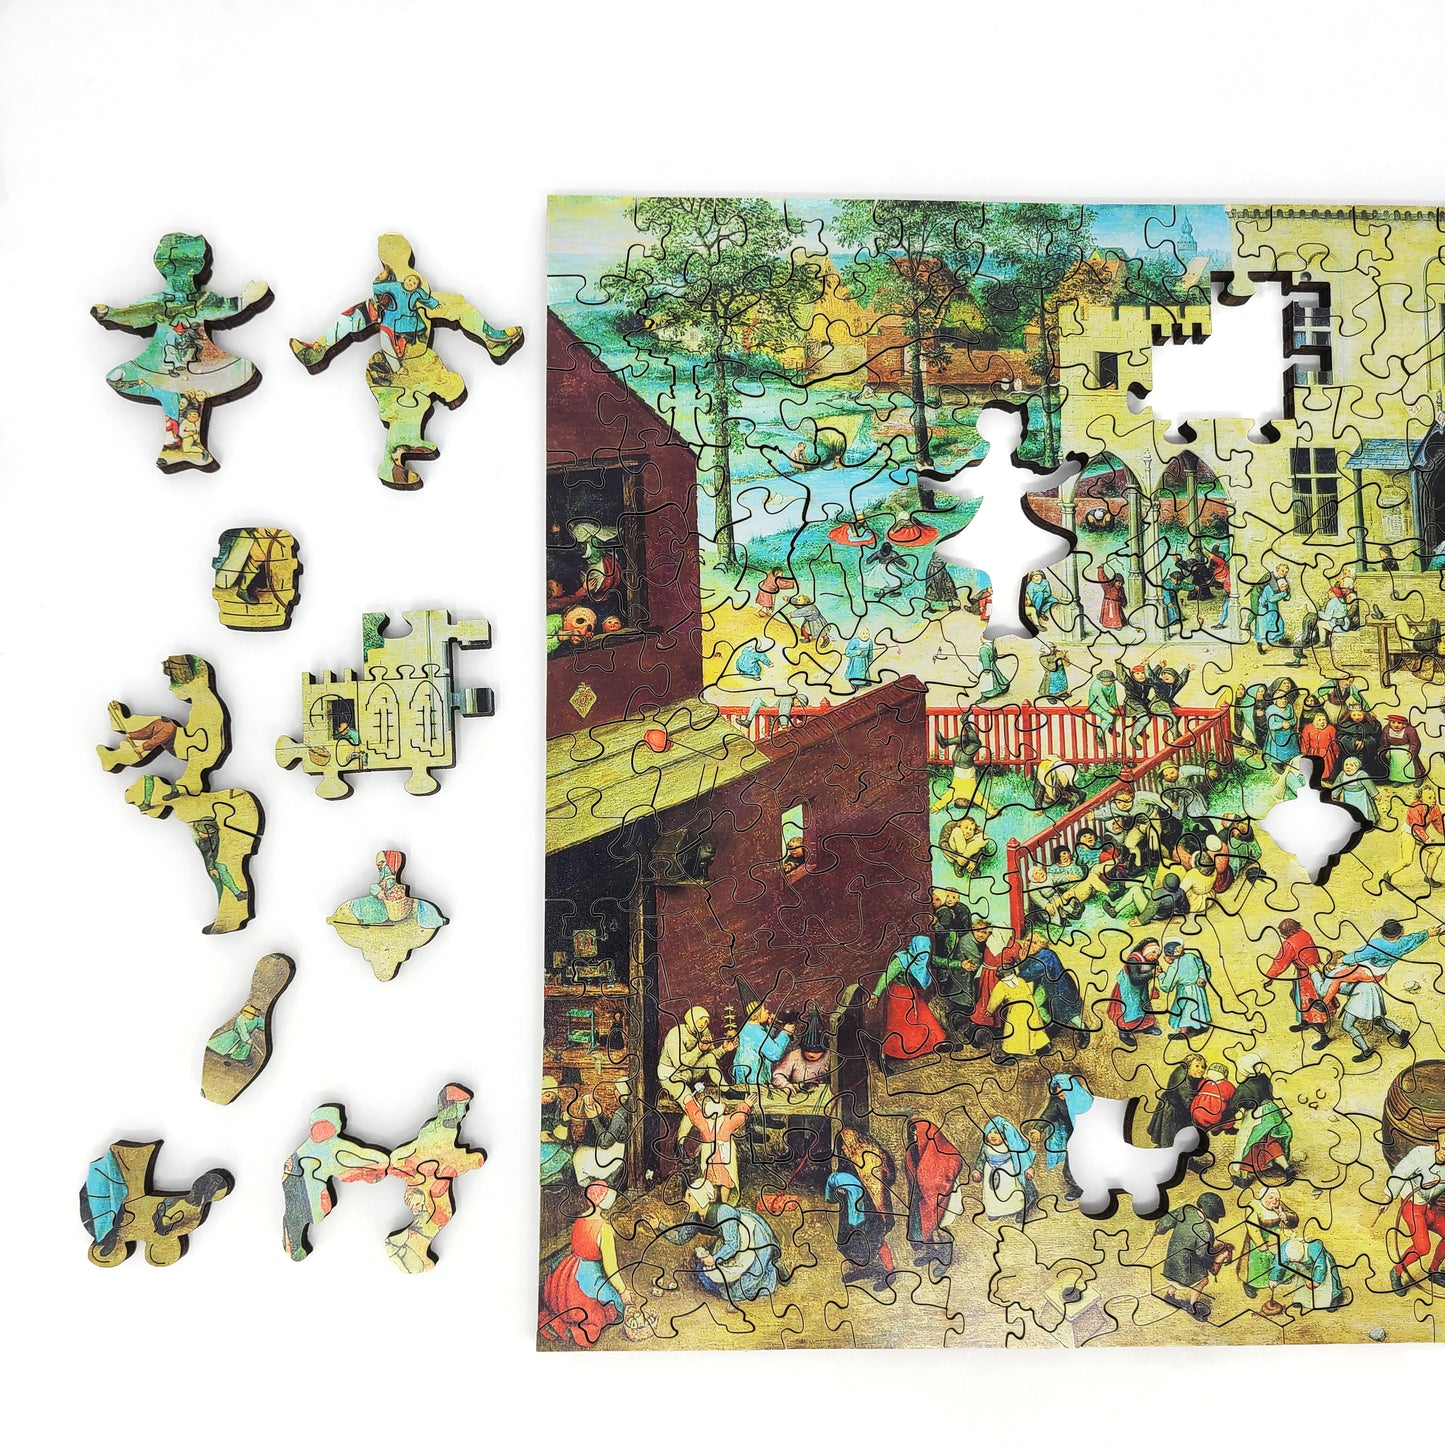 Wooden Jigsaw Puzzle with Uniquely Shaped Pieces for Adults - 300 Pieces - Children's Games